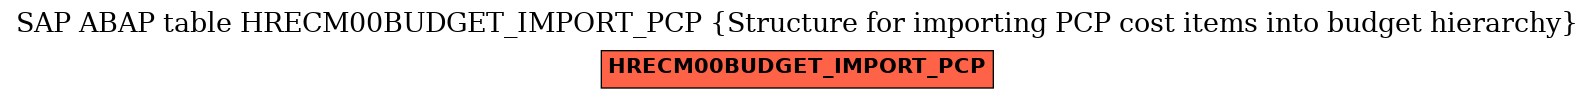 E-R Diagram for table HRECM00BUDGET_IMPORT_PCP (Structure for importing PCP cost items into budget hierarchy)